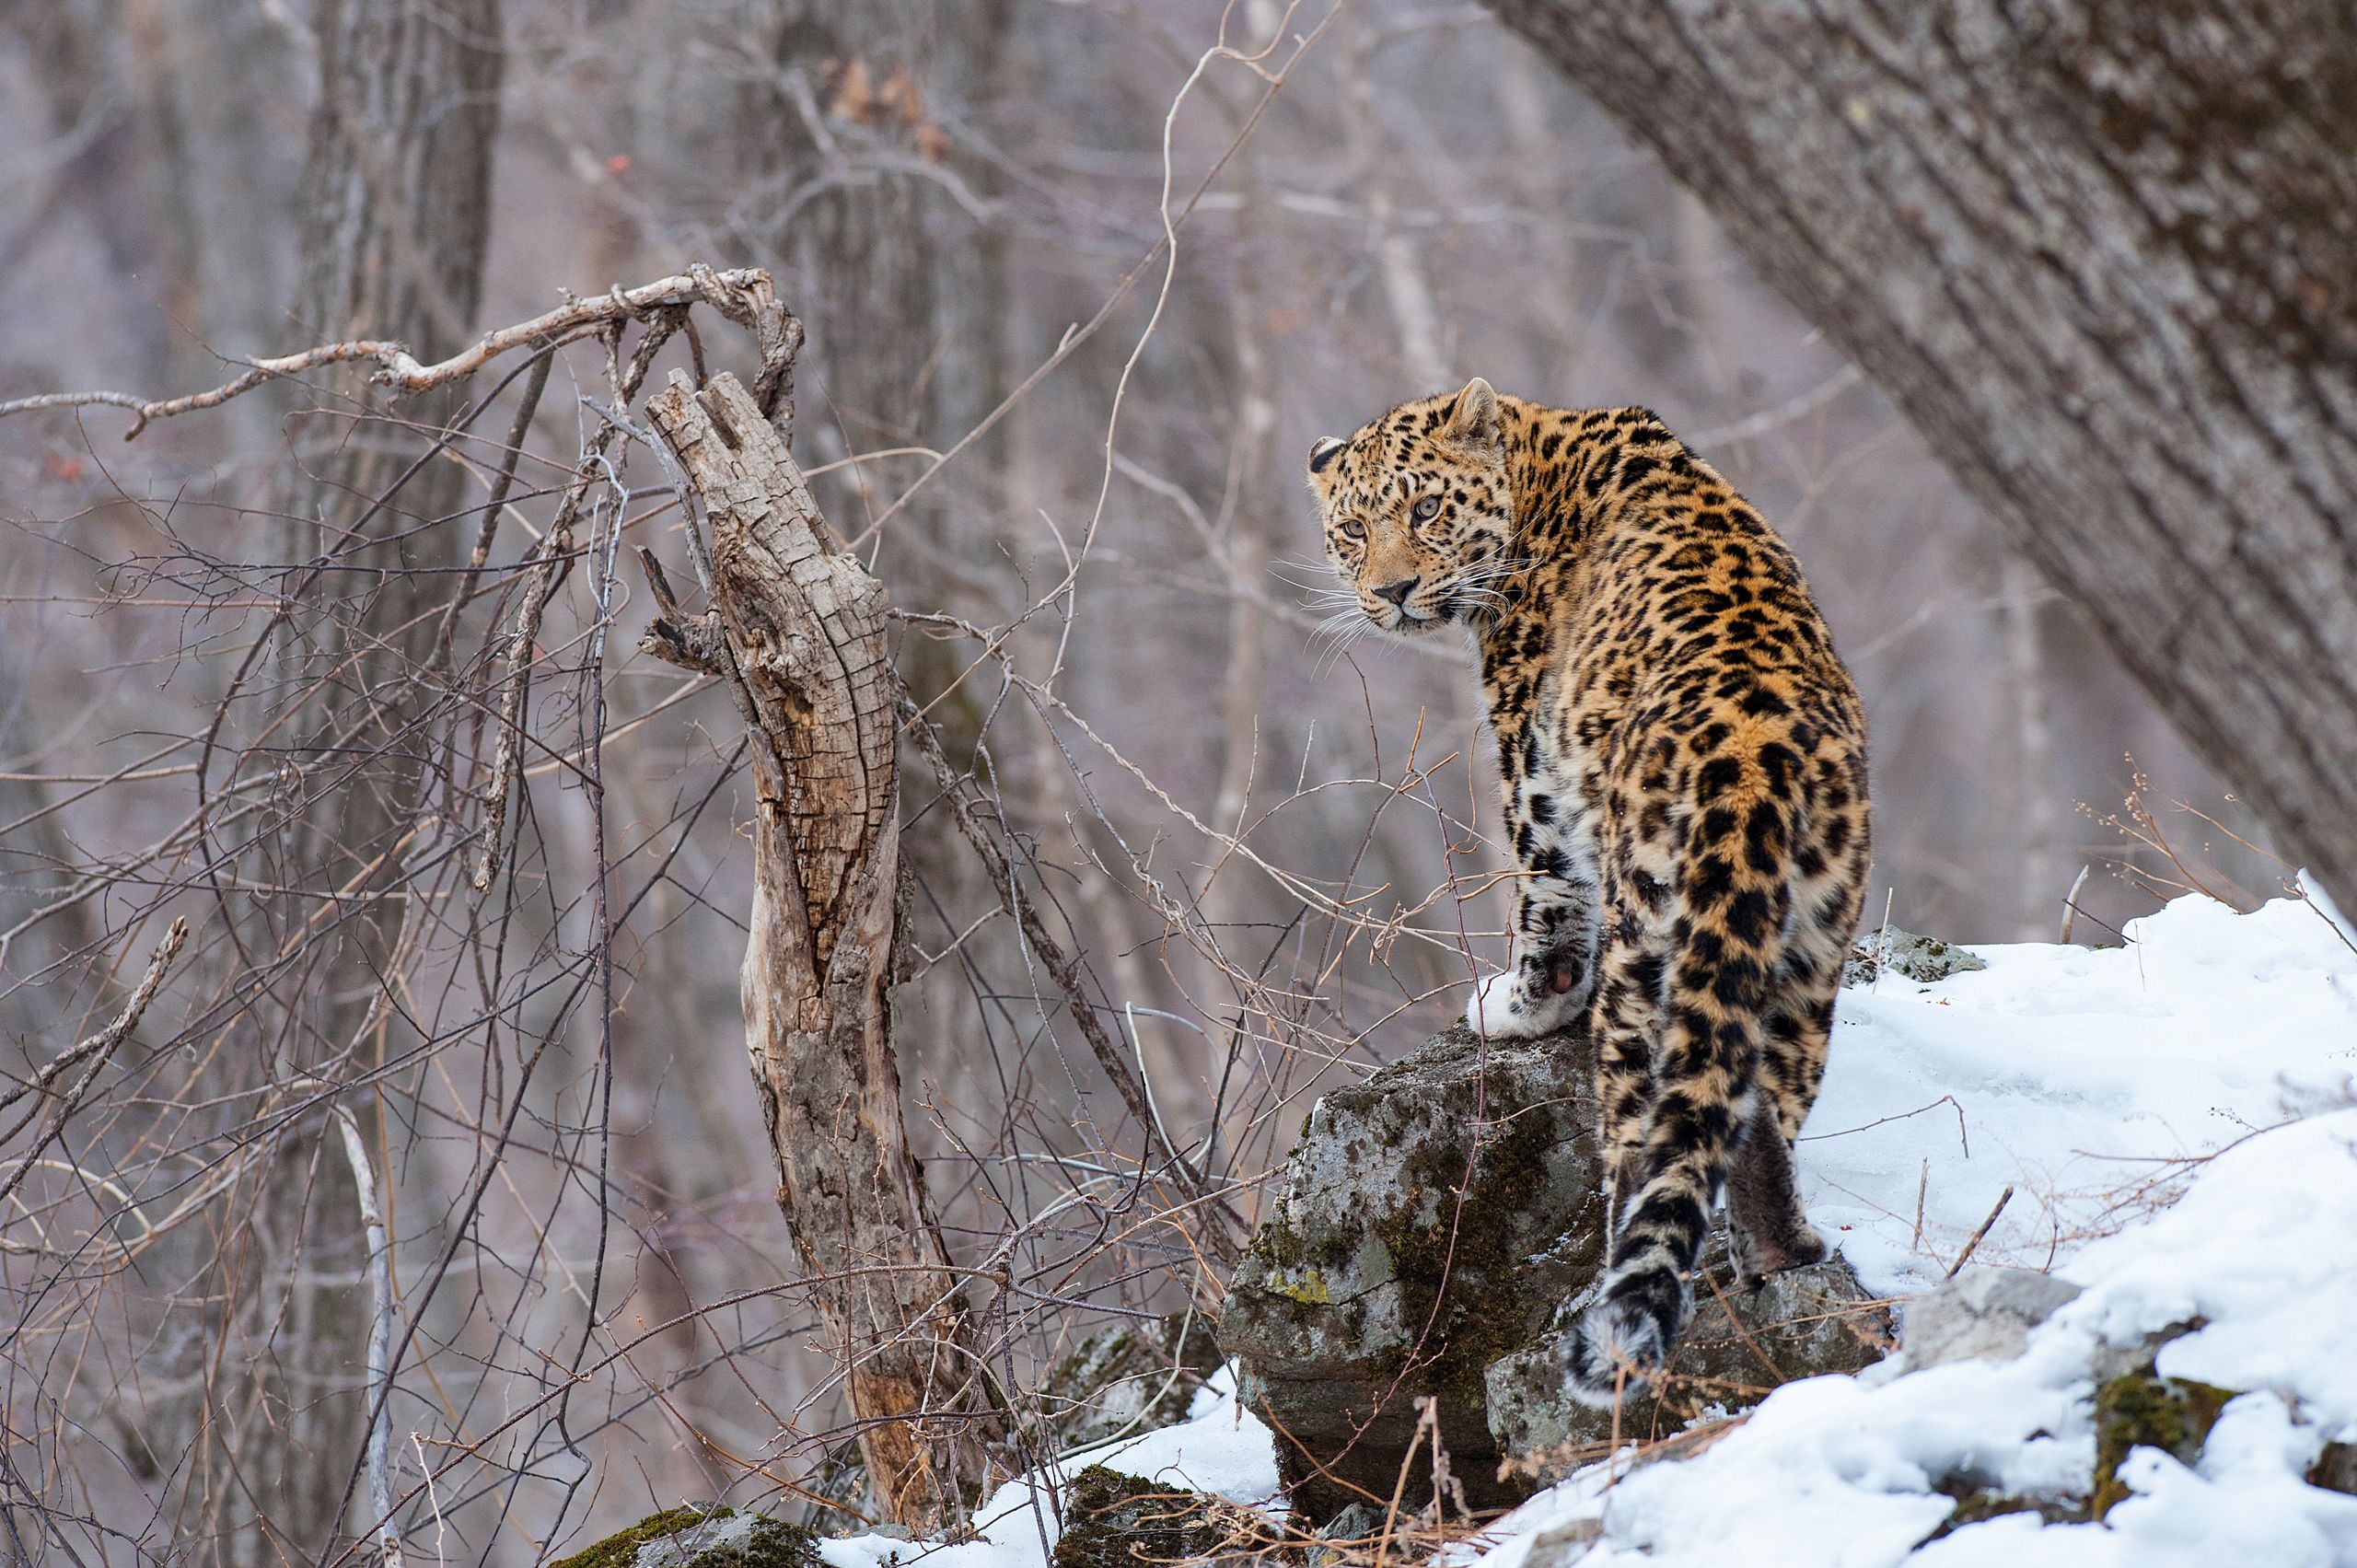 An Amur leopard stands on a rock in a snowy landscape